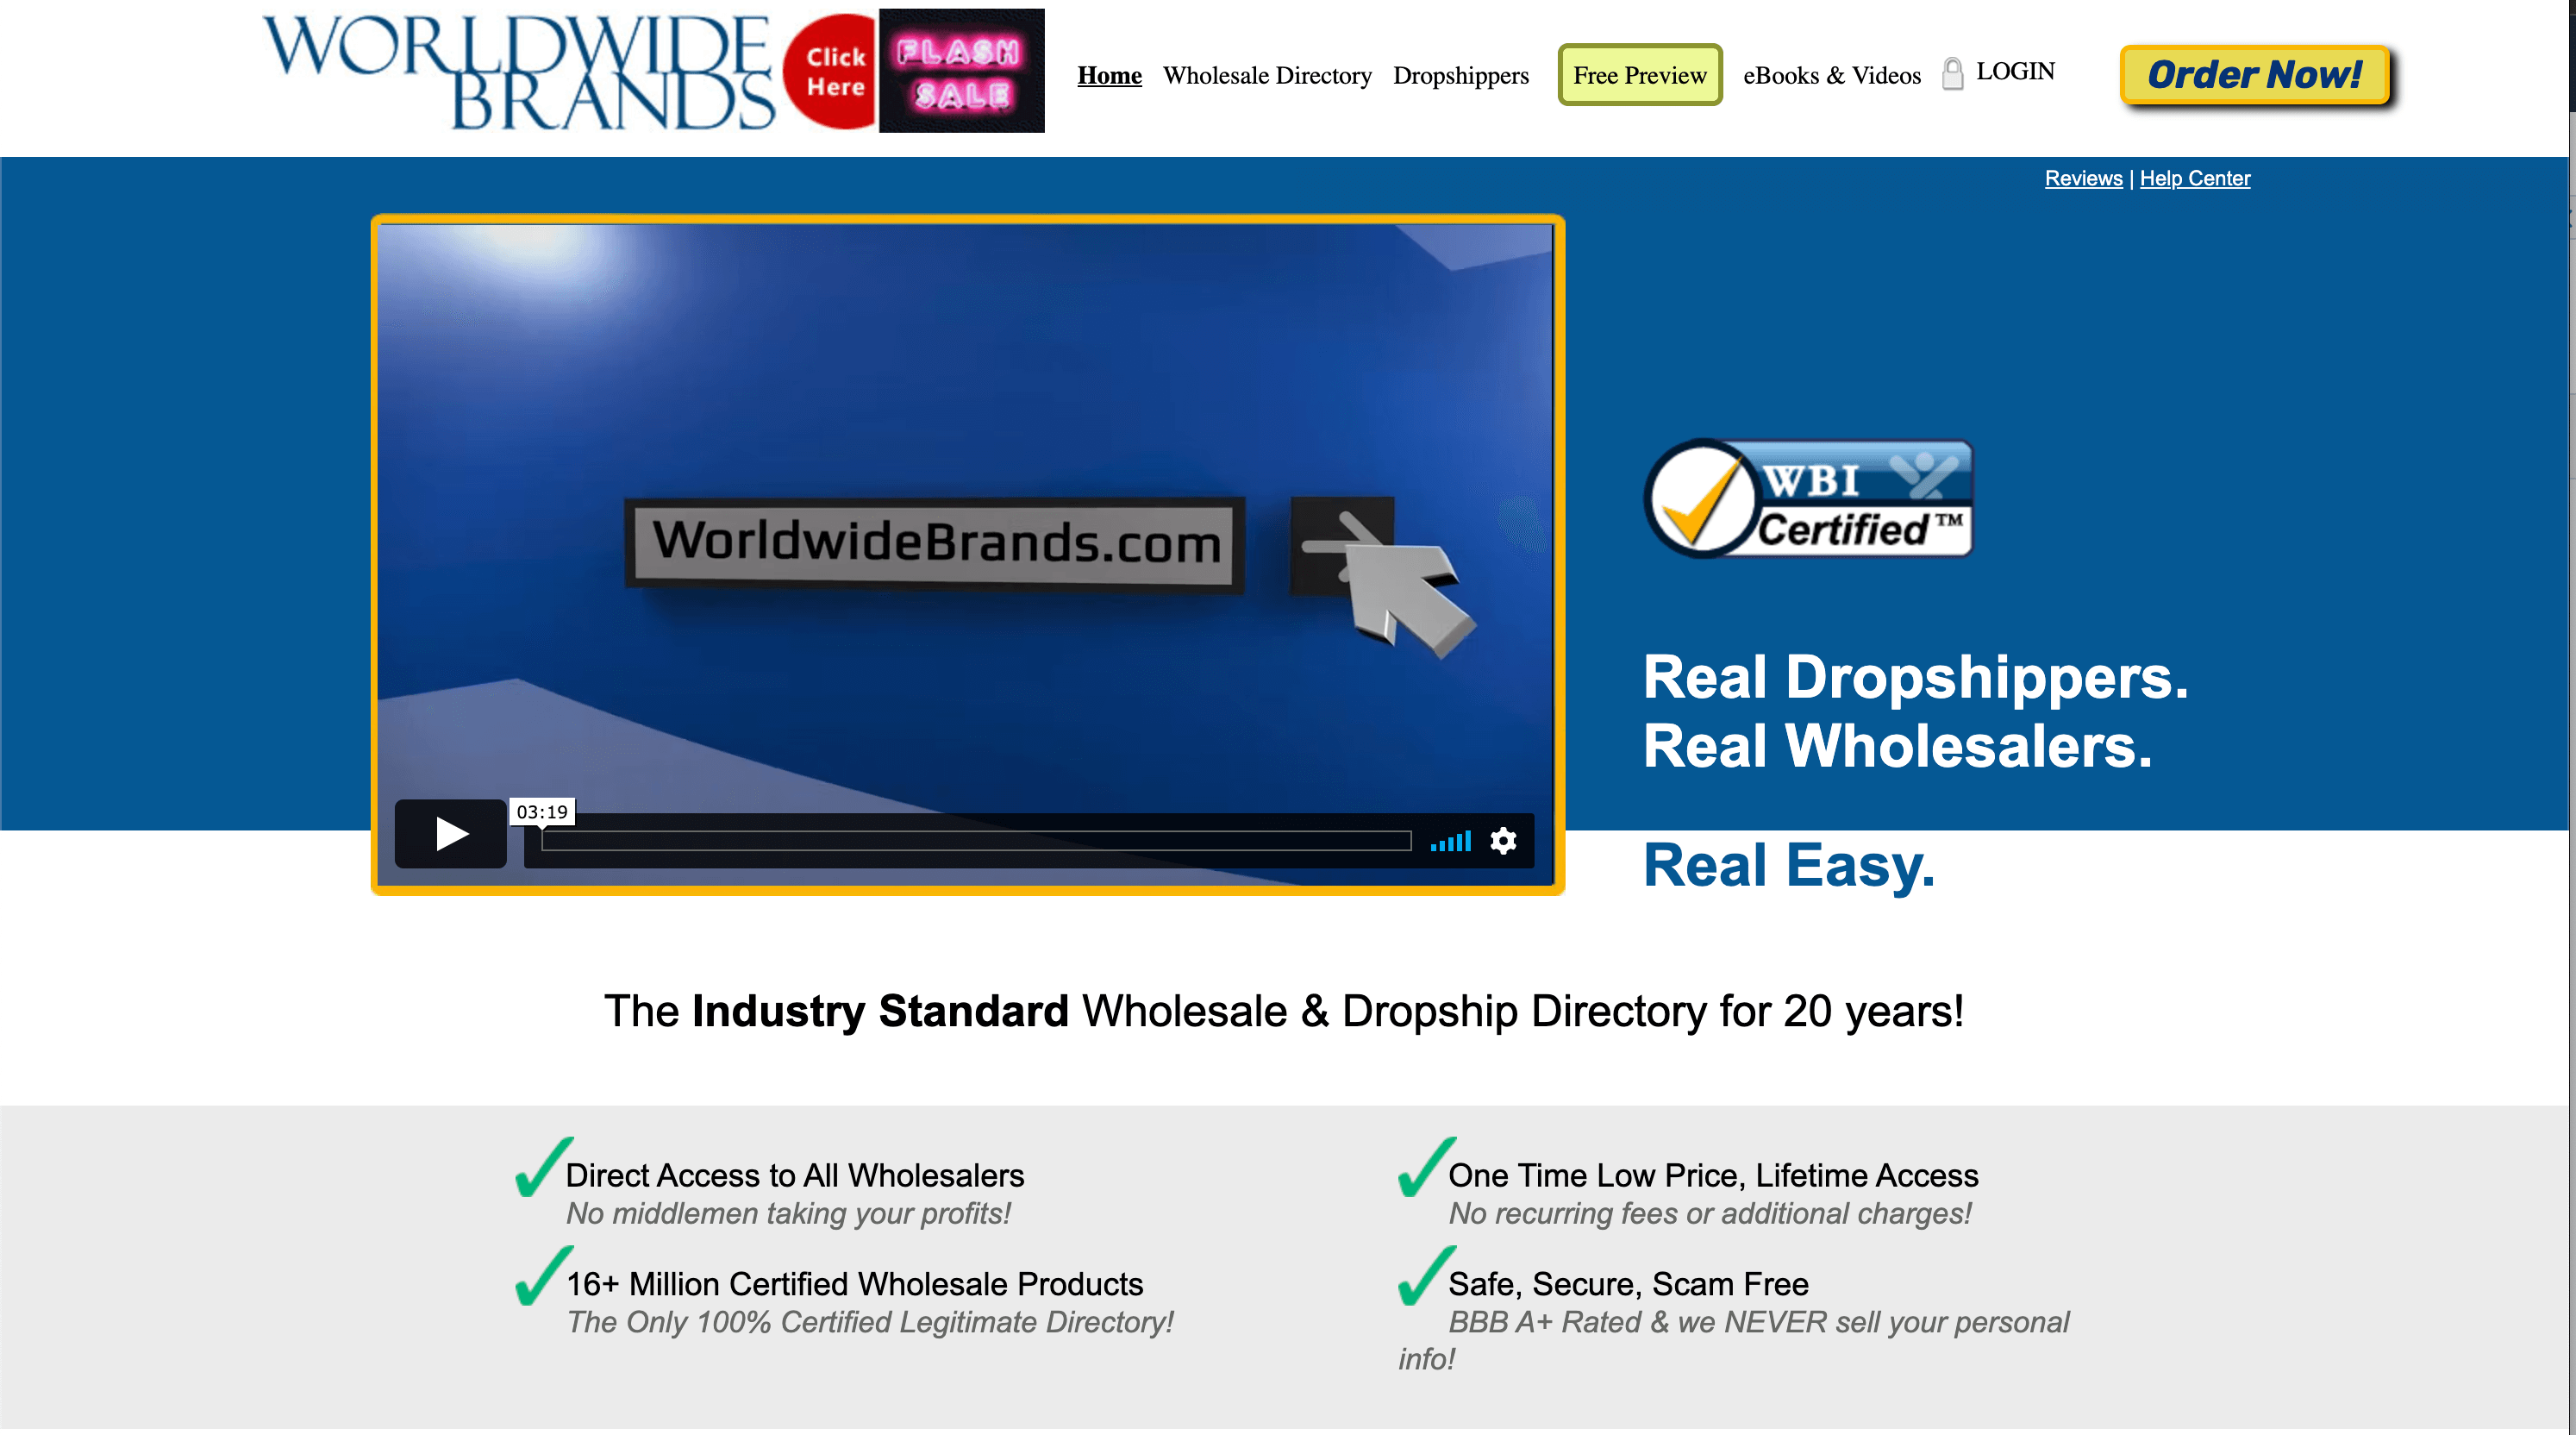 World Wide Brands' home page